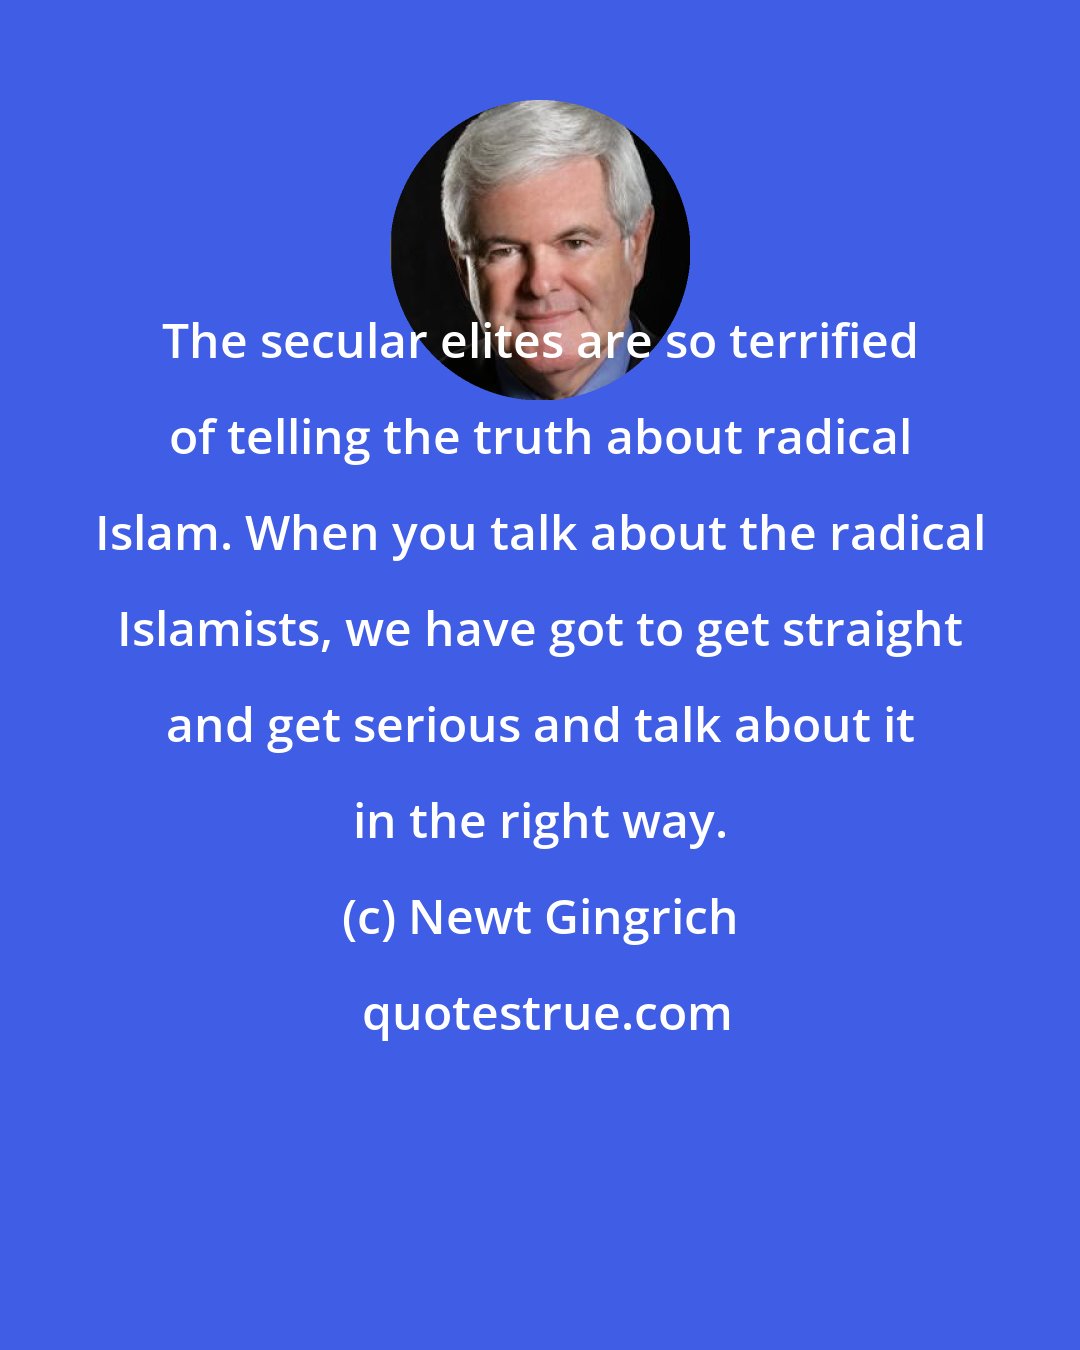 Newt Gingrich: The secular elites are so terrified of telling the truth about radical Islam. When you talk about the radical Islamists, we have got to get straight and get serious and talk about it in the right way.